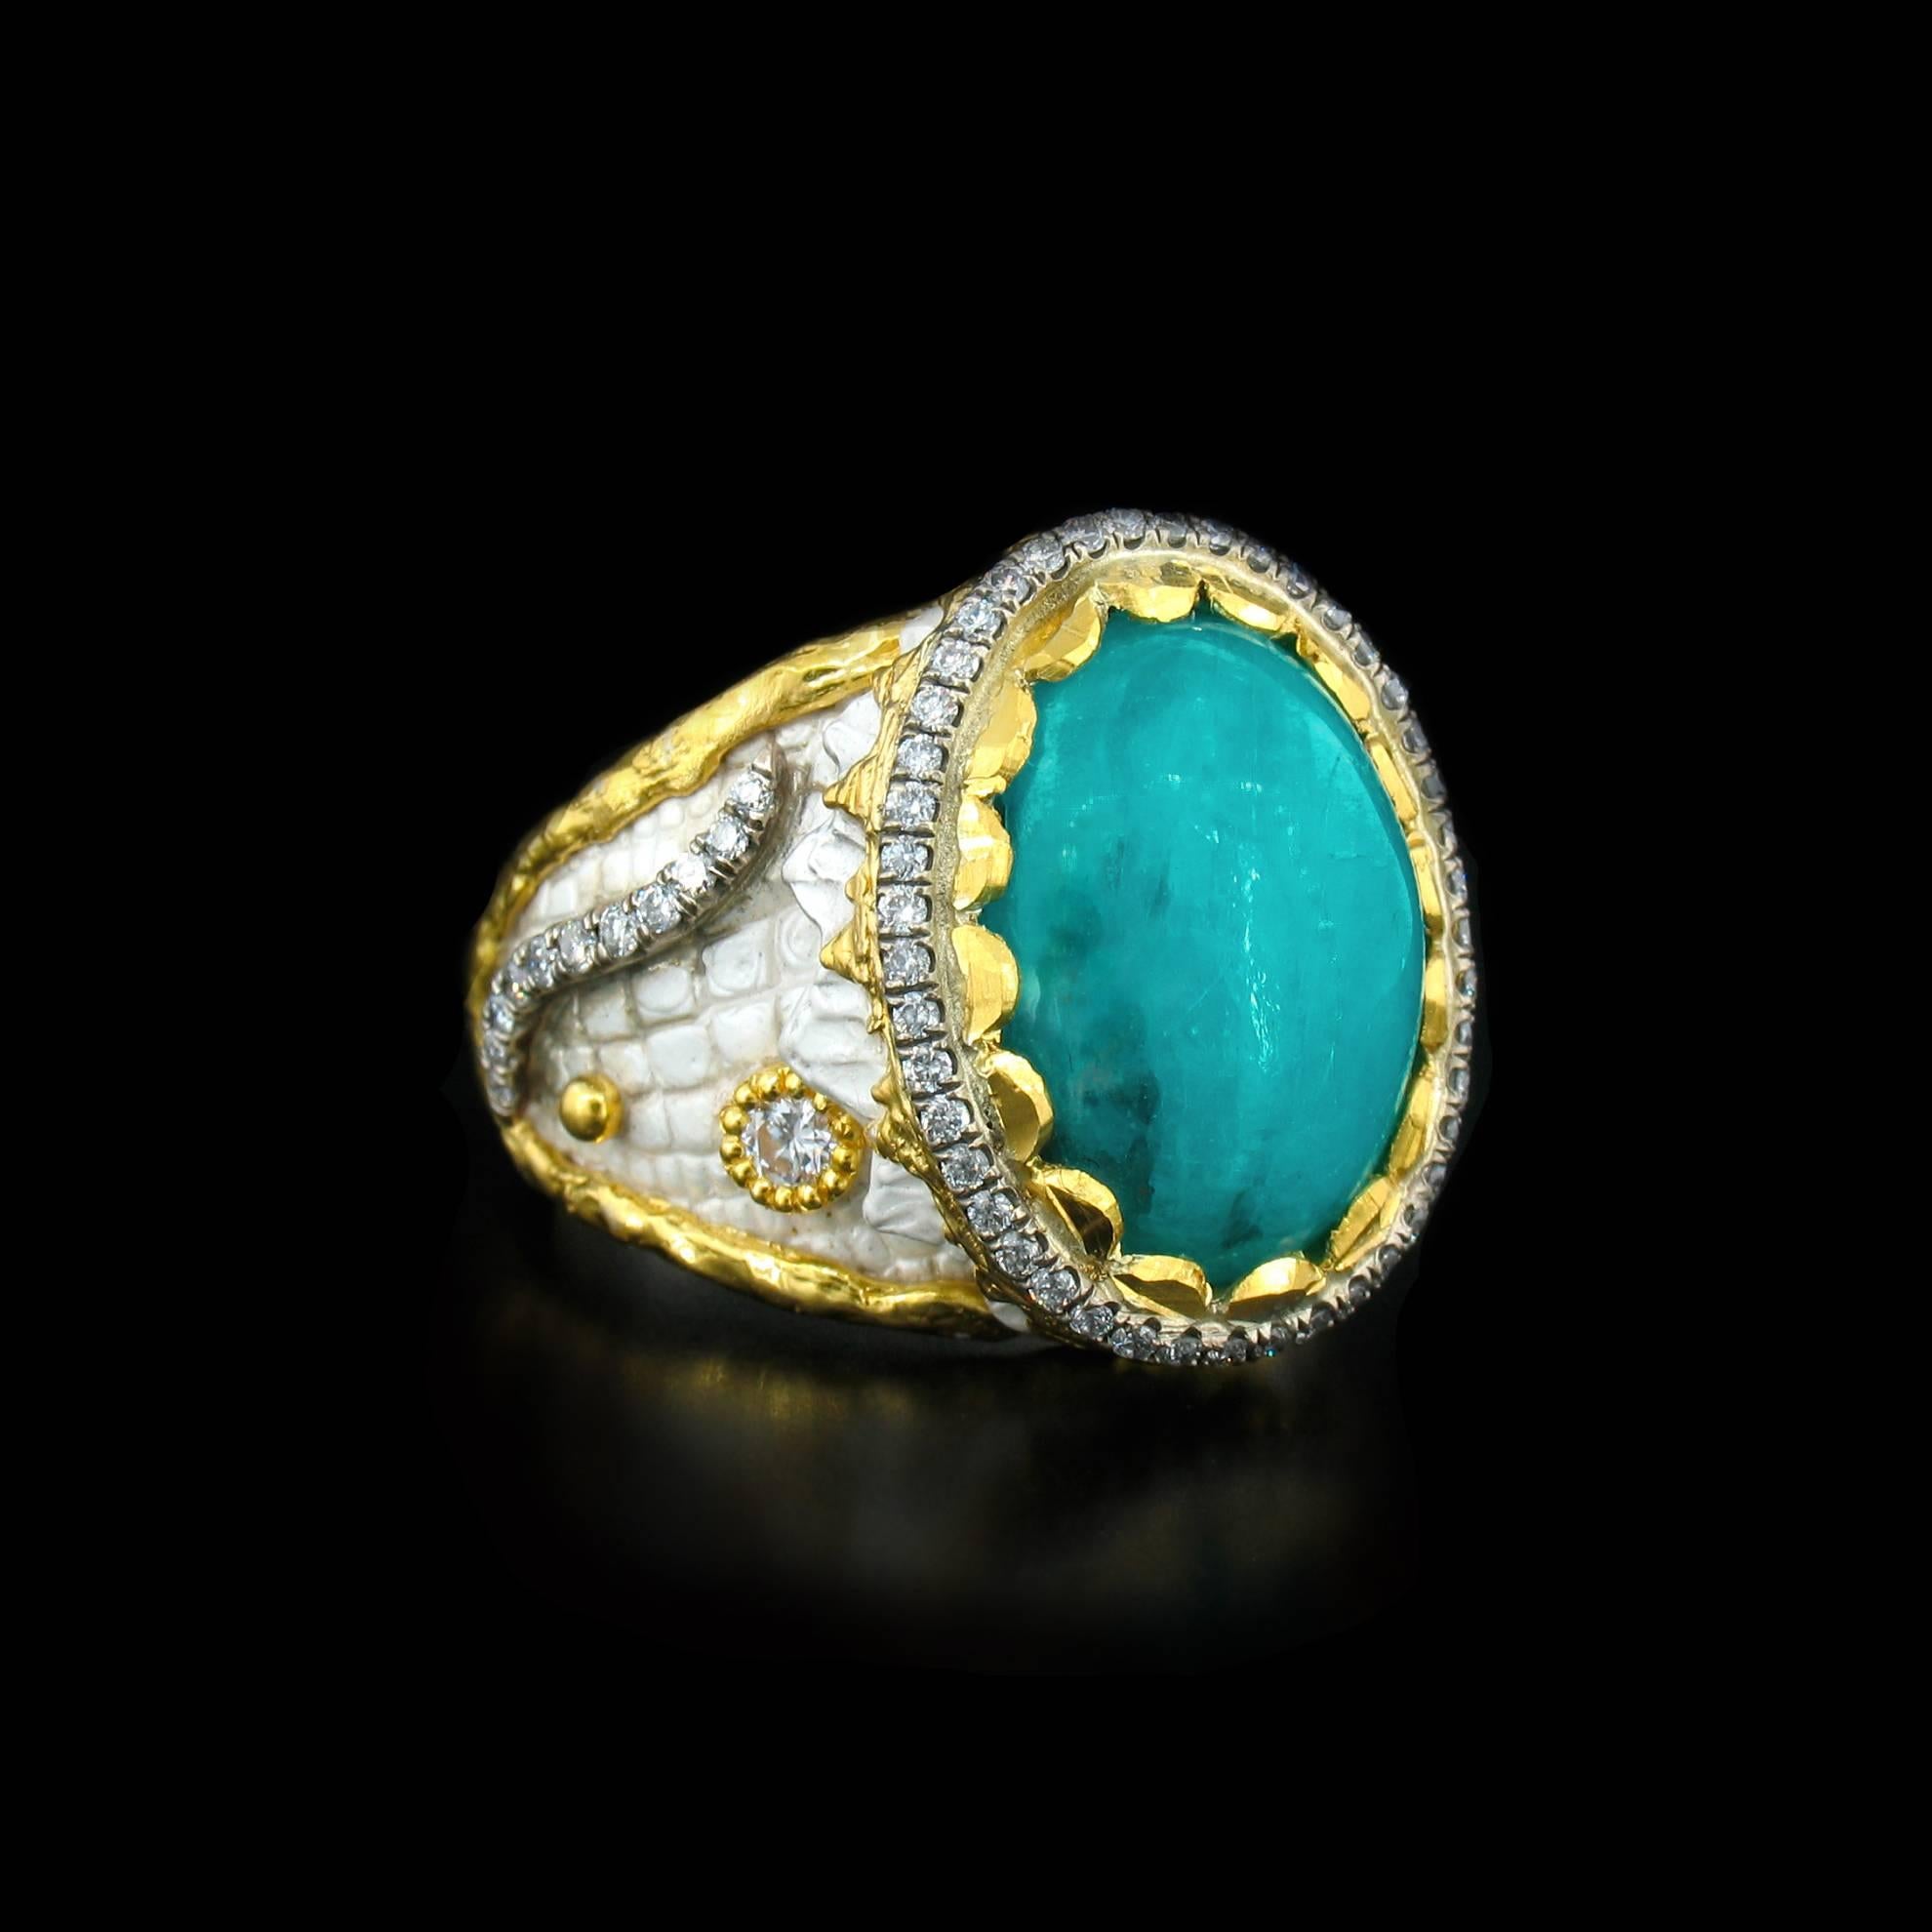 This exquisite Paraiba and Diamond Ring features a 7.36 carat Brazilian Paraiba, accented with 0.60 carats of fully faceted Diamonds.  They are set in a combination of 24K Gold, 18K Gold and Silver. To give this ring a beautiful unique look, the